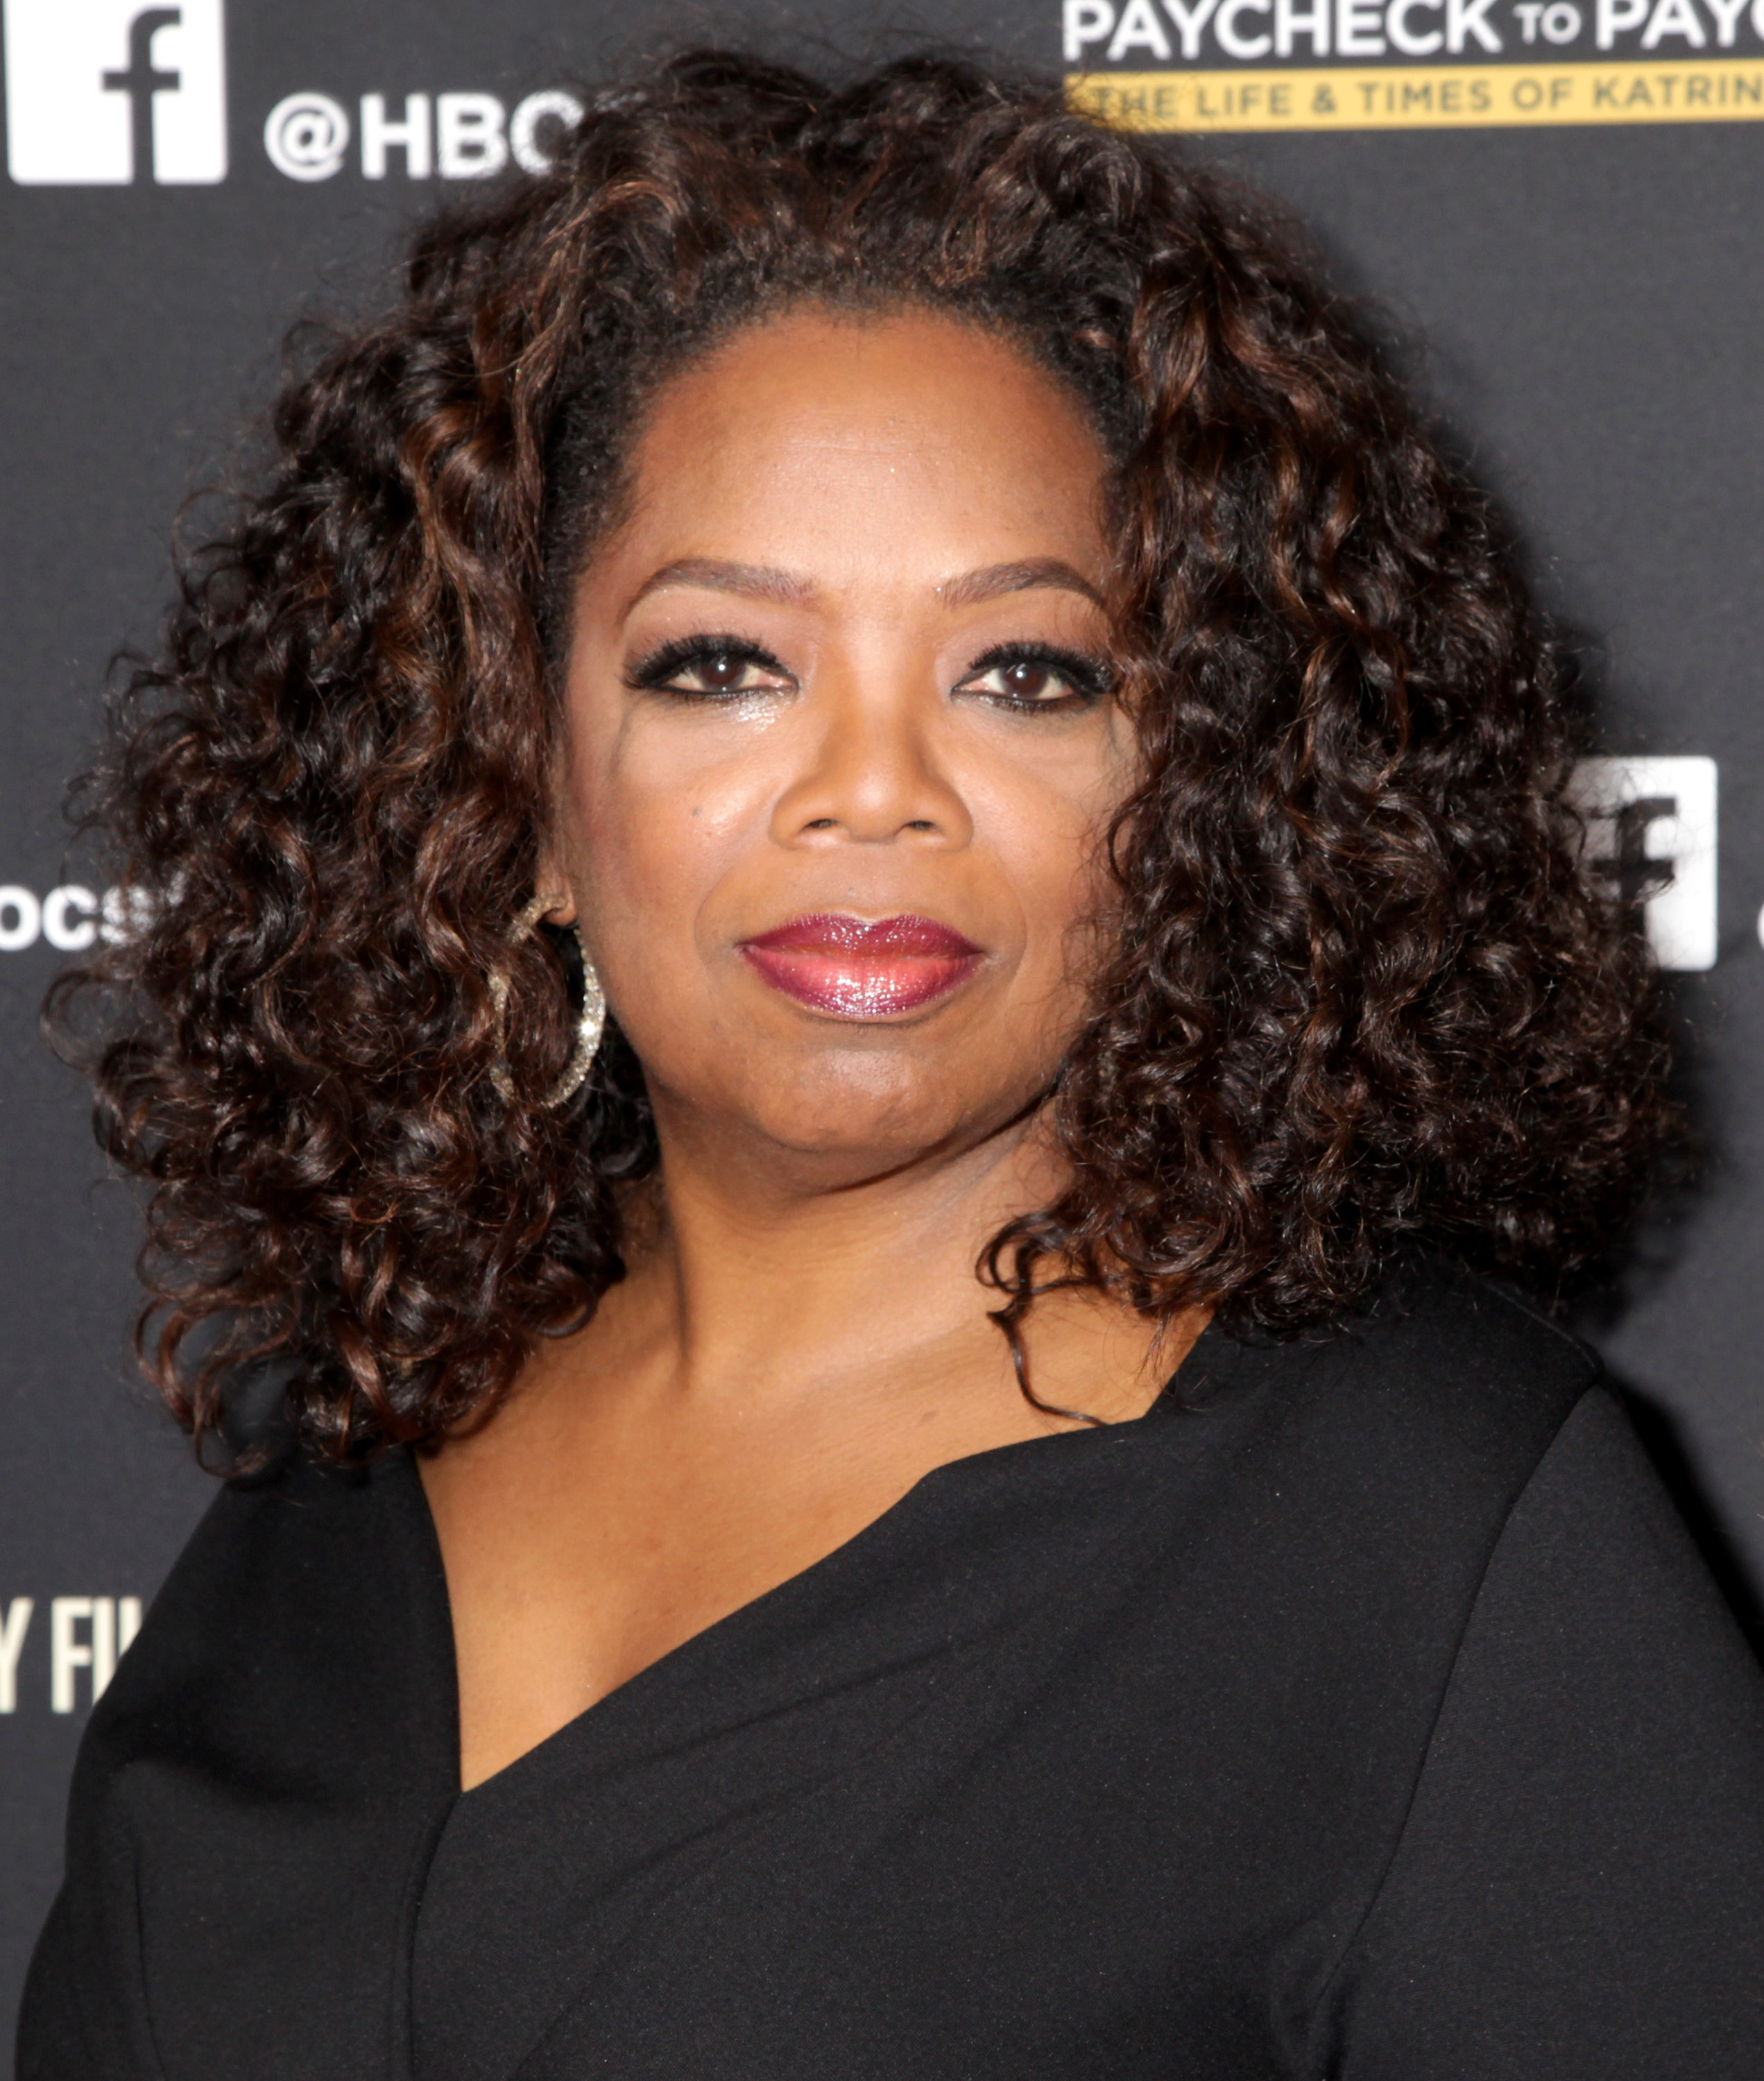 Oprah attends the Los Angeles premiere of HBO Documentary Films "Paycheck To Paycheck" at the Linwood Dunn Theater at the Pickford Center for Motion Study on March 10, 2014 in Hollywood, California. (Paul Redmond—WireImage/Getty Images)